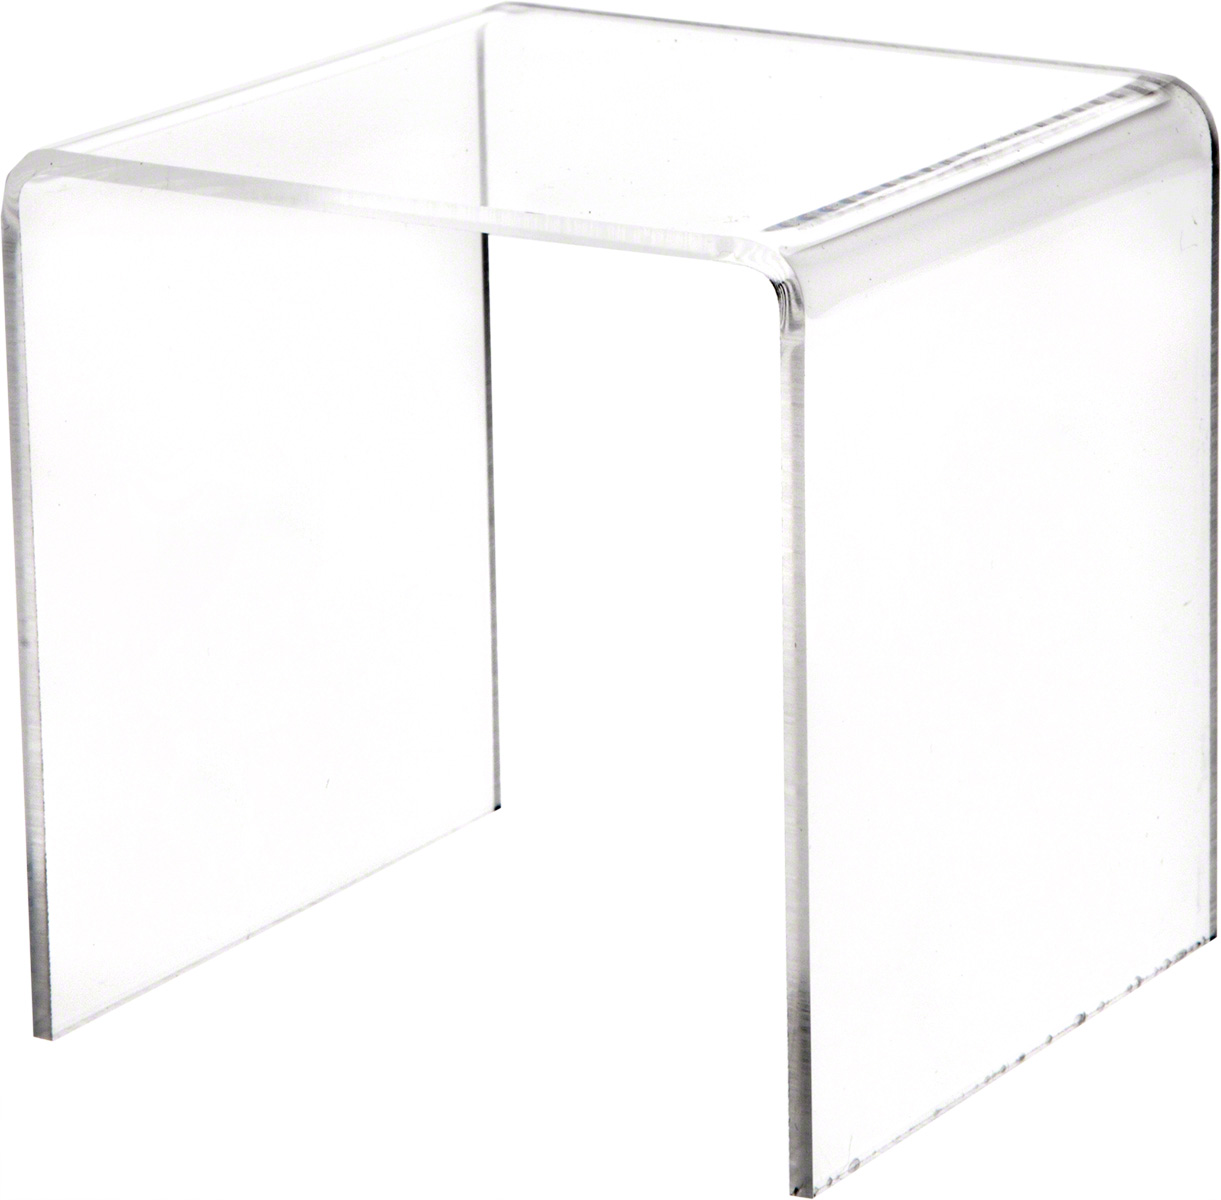 Plymor Clear Acrylic Square Display Riser 3 Pack 8"H x 8"W x 8"D 1/8" thick 